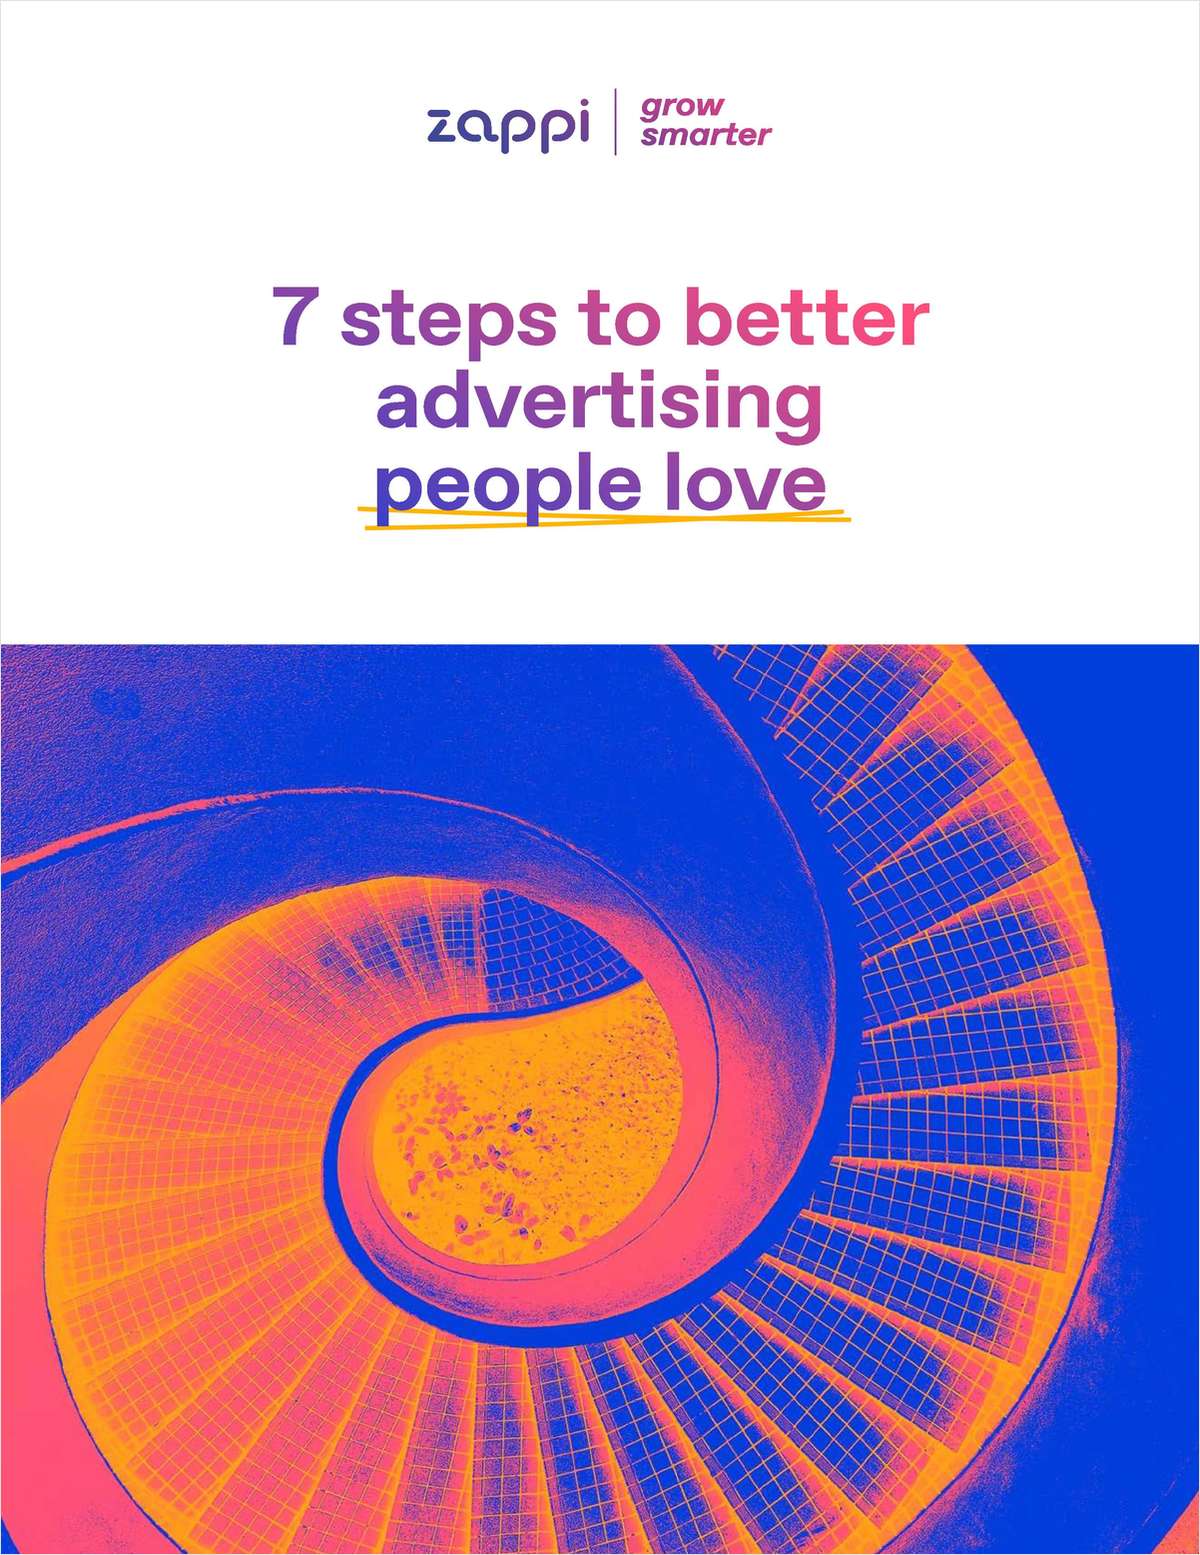 7 steps to better advertising people love